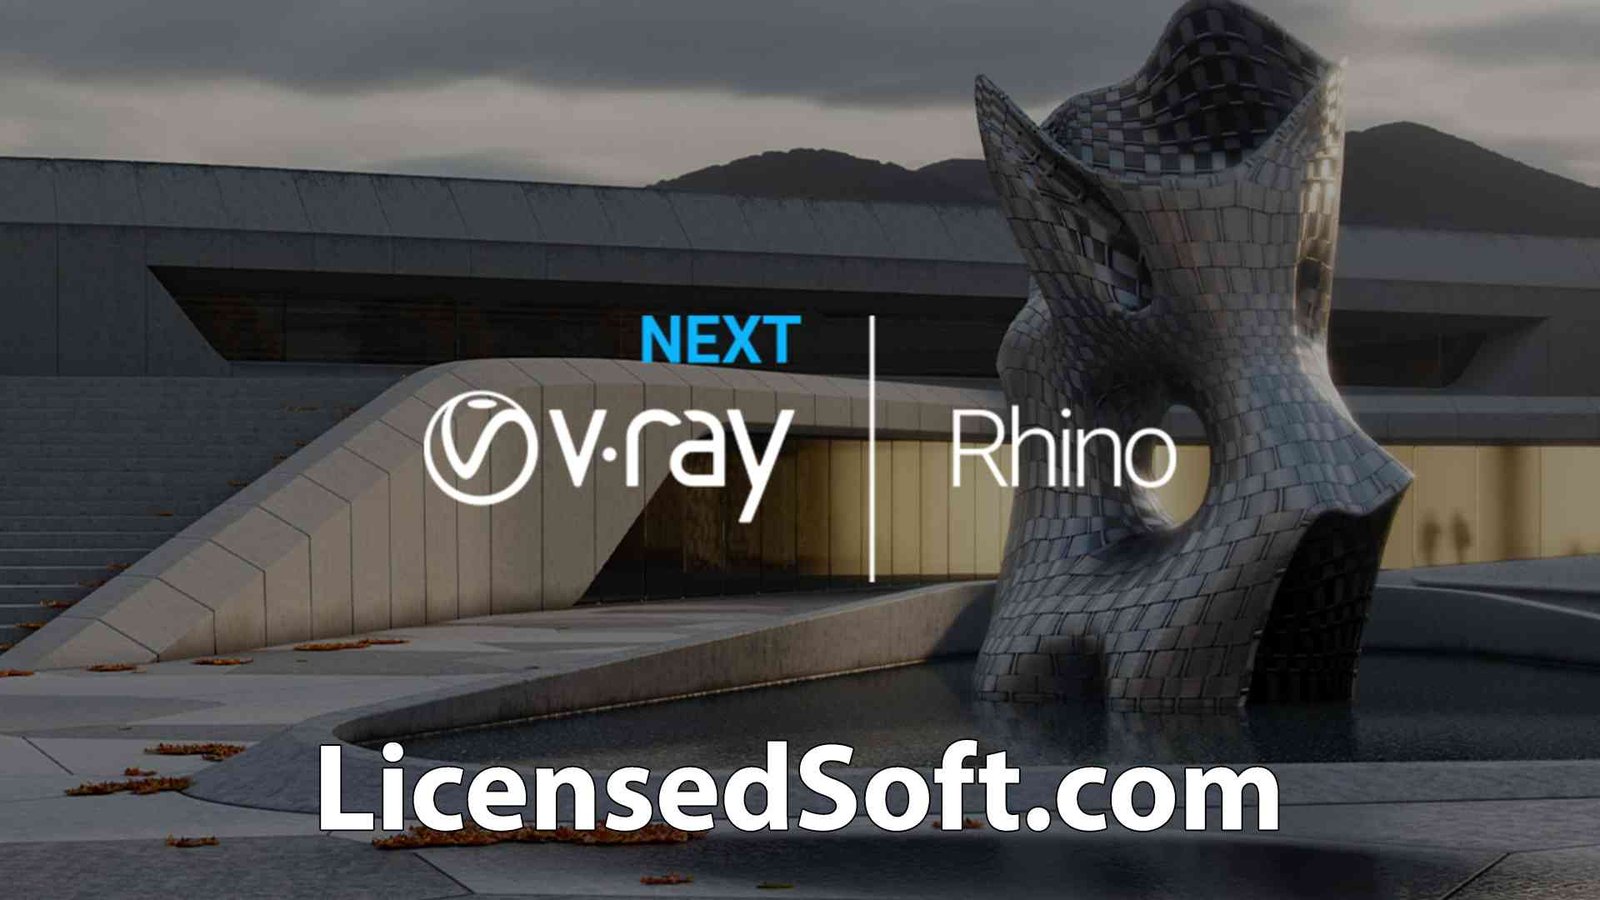 Chaos V-Ray 6.00.03 for Rhinoceros Cover Image By LicensedSoft